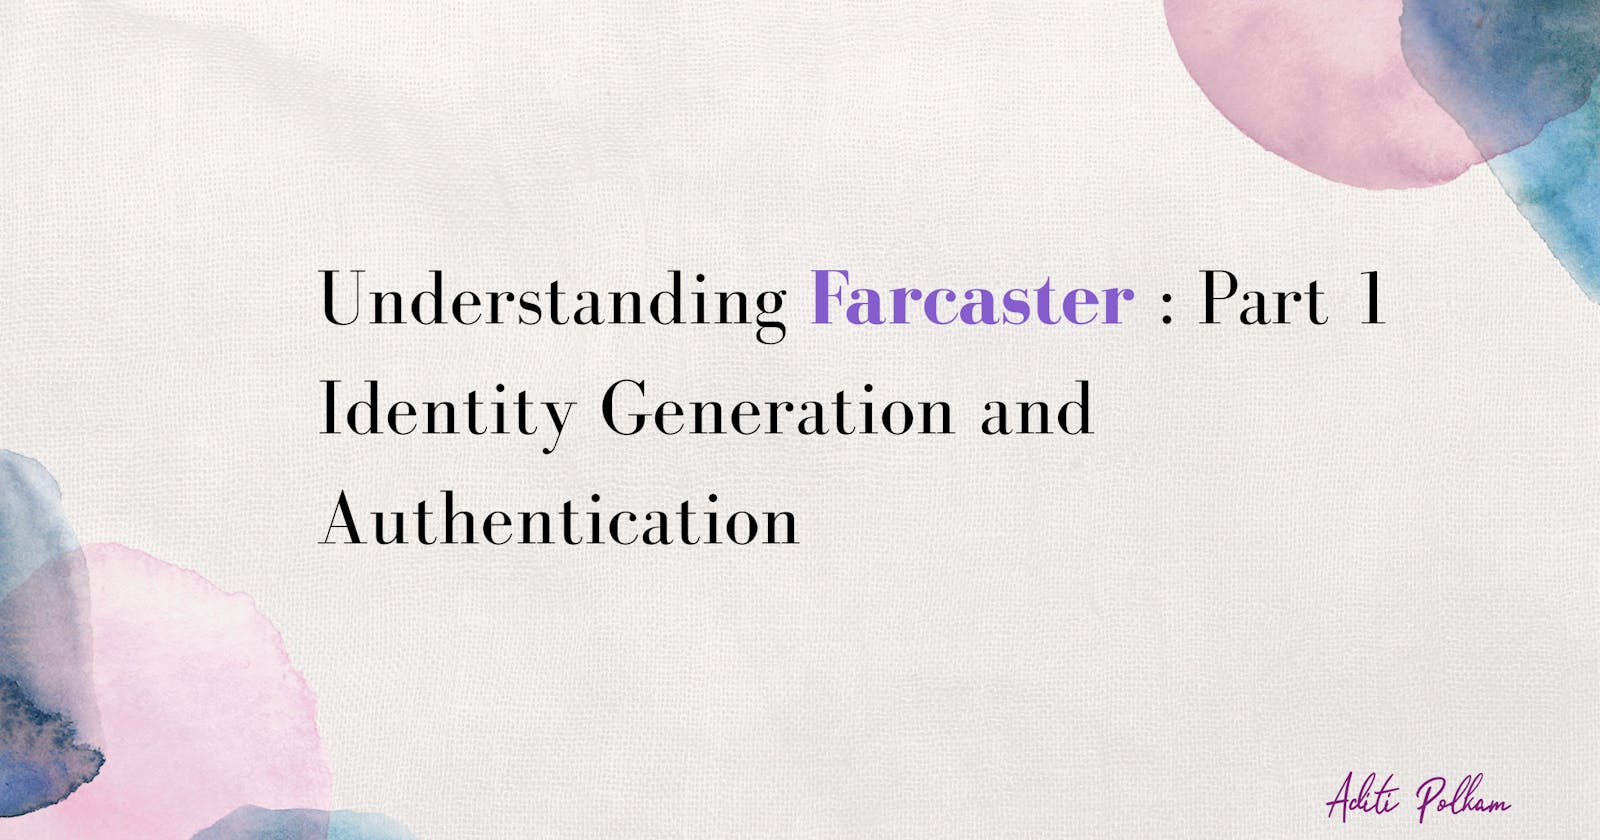 Understanding Farcaster: Part 1; 
Identity Generation and Authentication